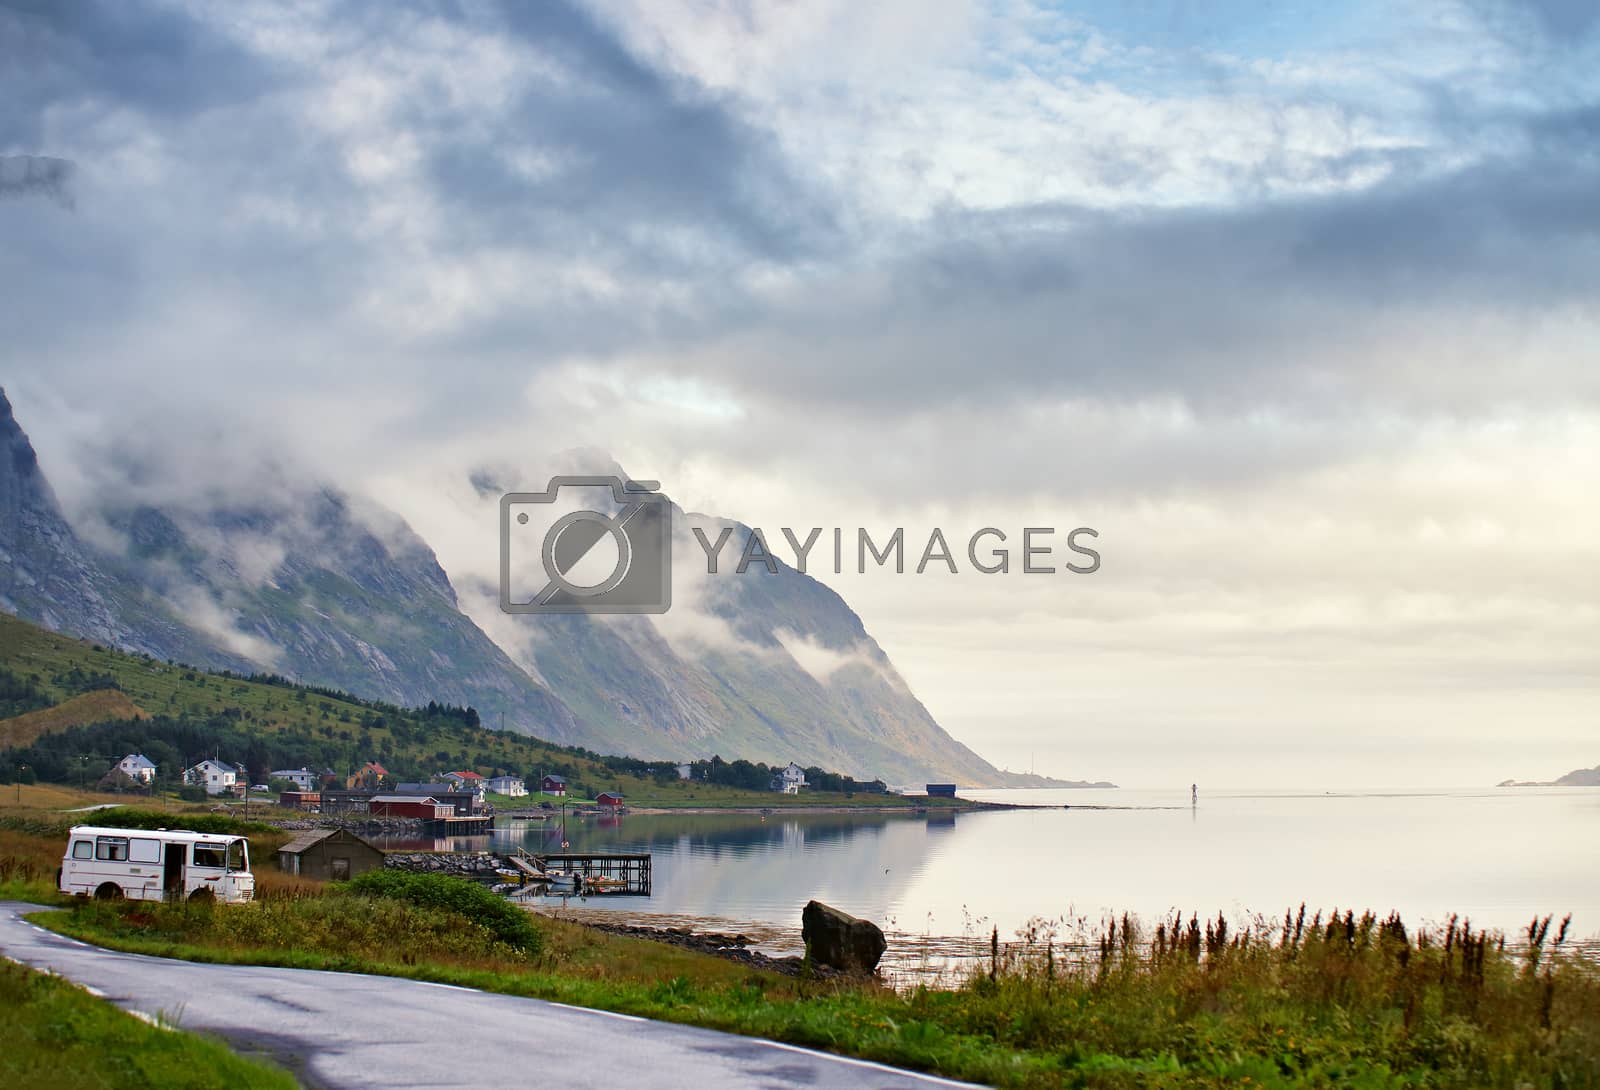 Royalty free image of Norway villages in fjord. Cloudy Nordic day. by weise_maxim